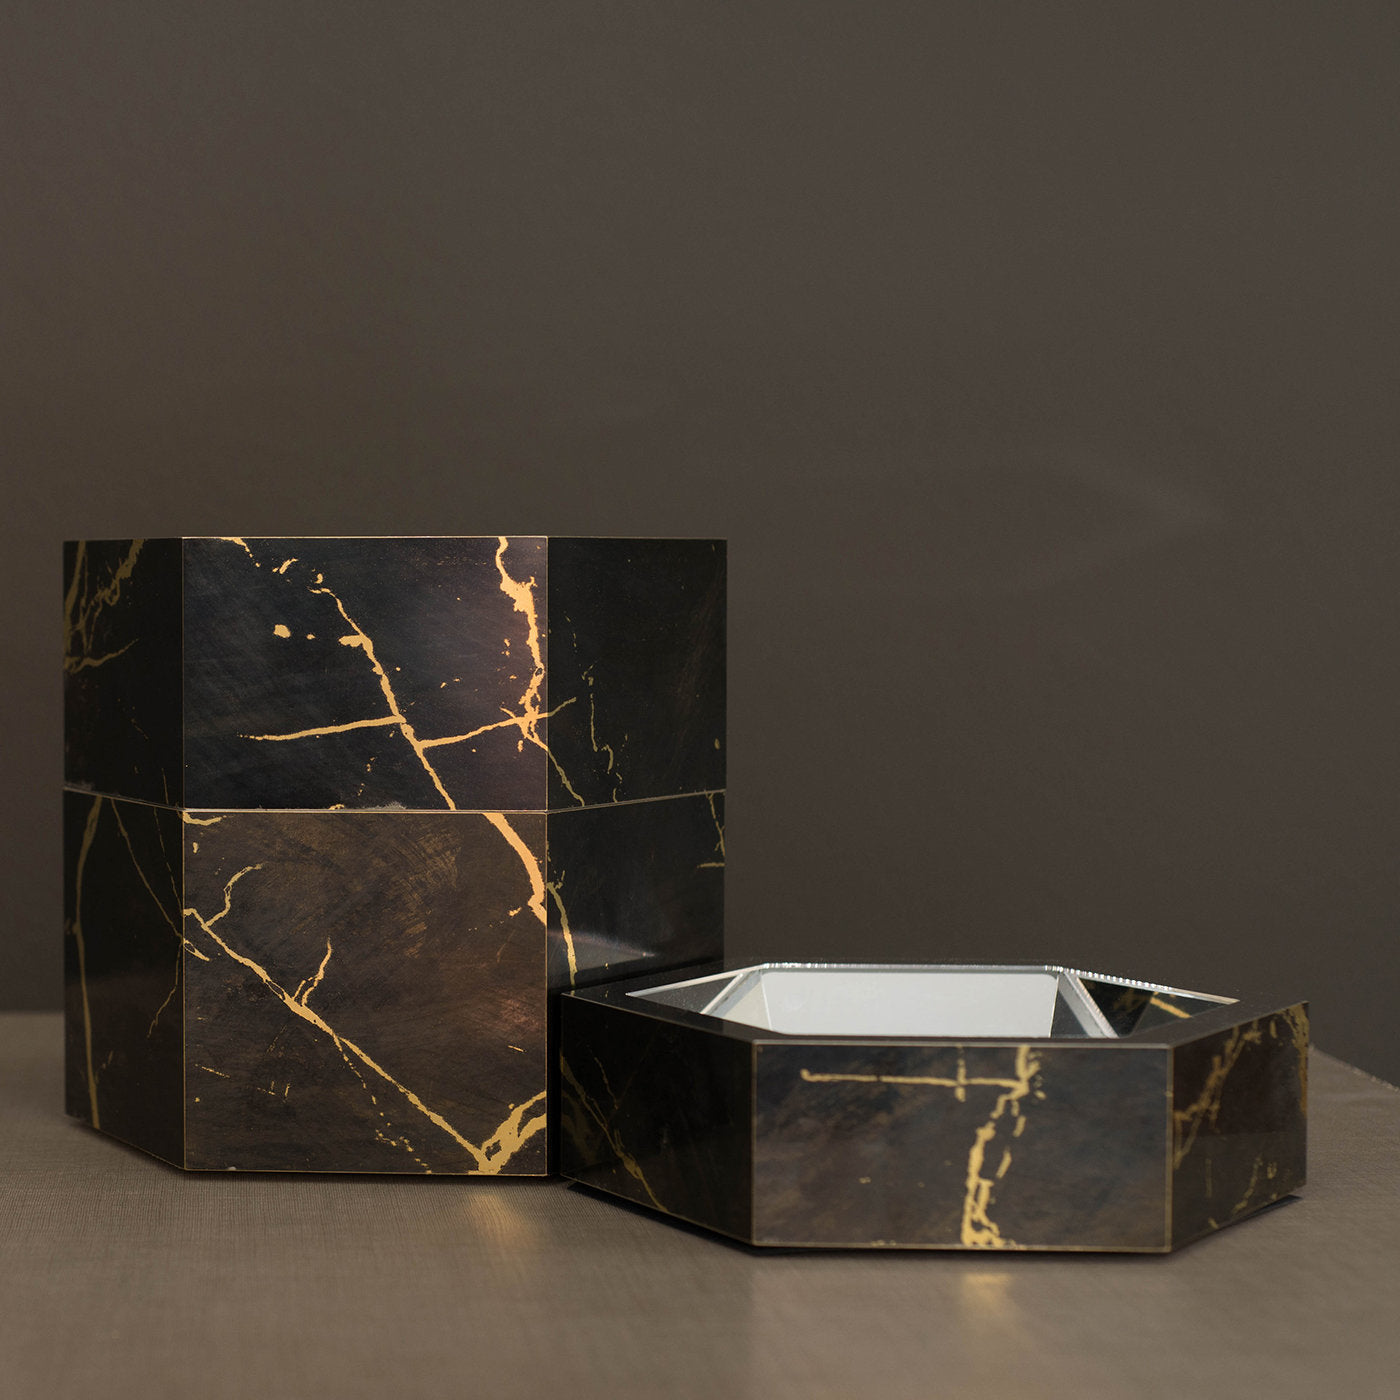 Esa Black Marbled Stackable Catchall Box - Alternative view 1